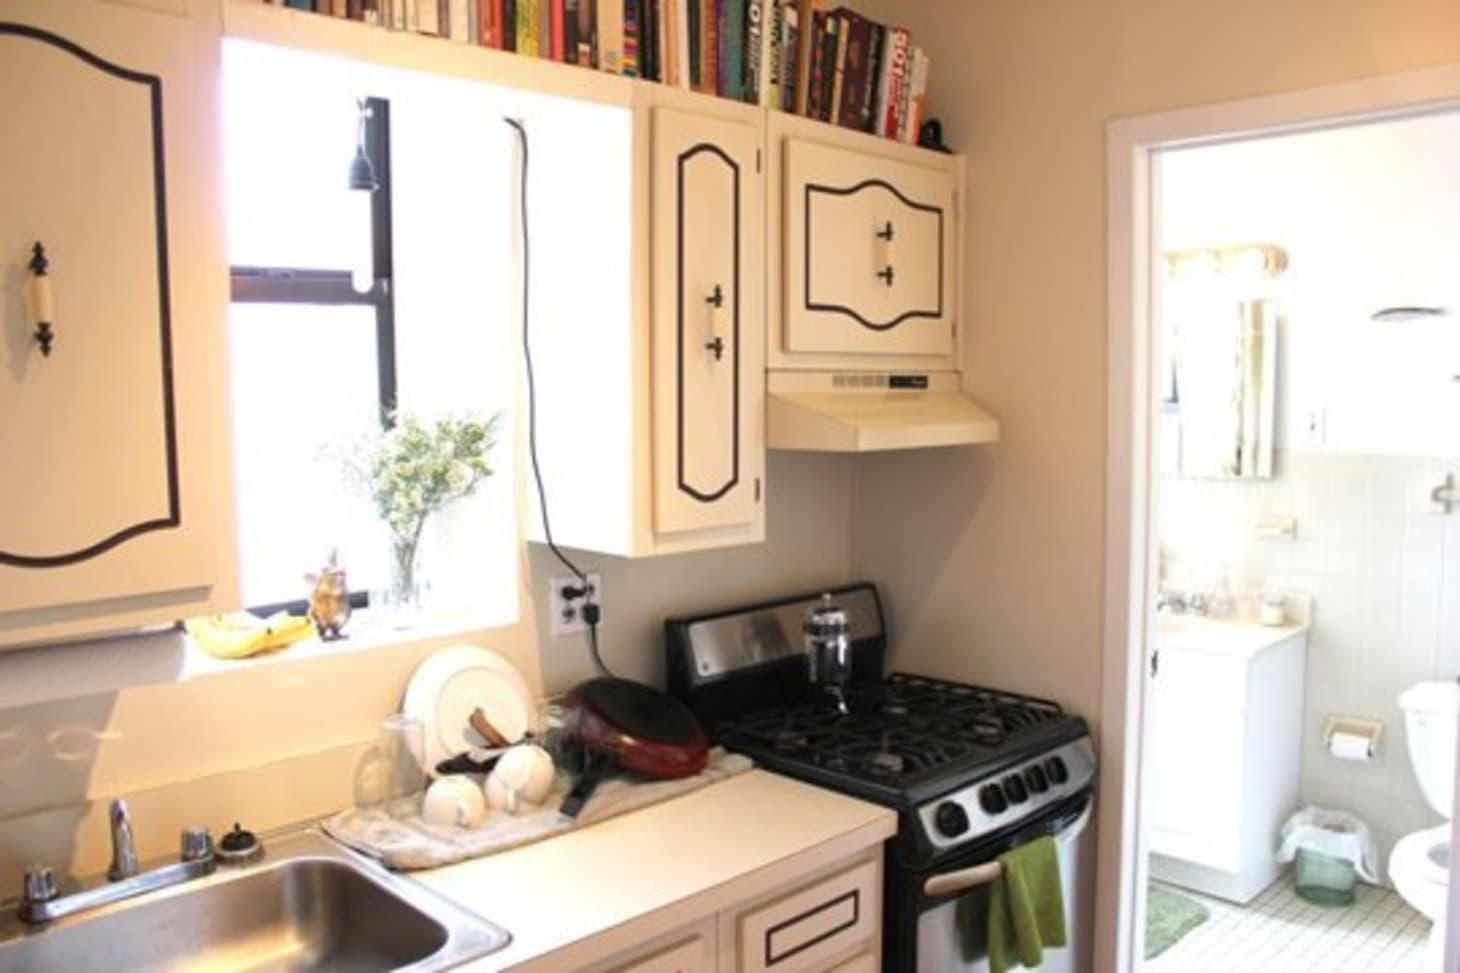 7 Things to Do with That Awkward Space Above the Cabinets ...